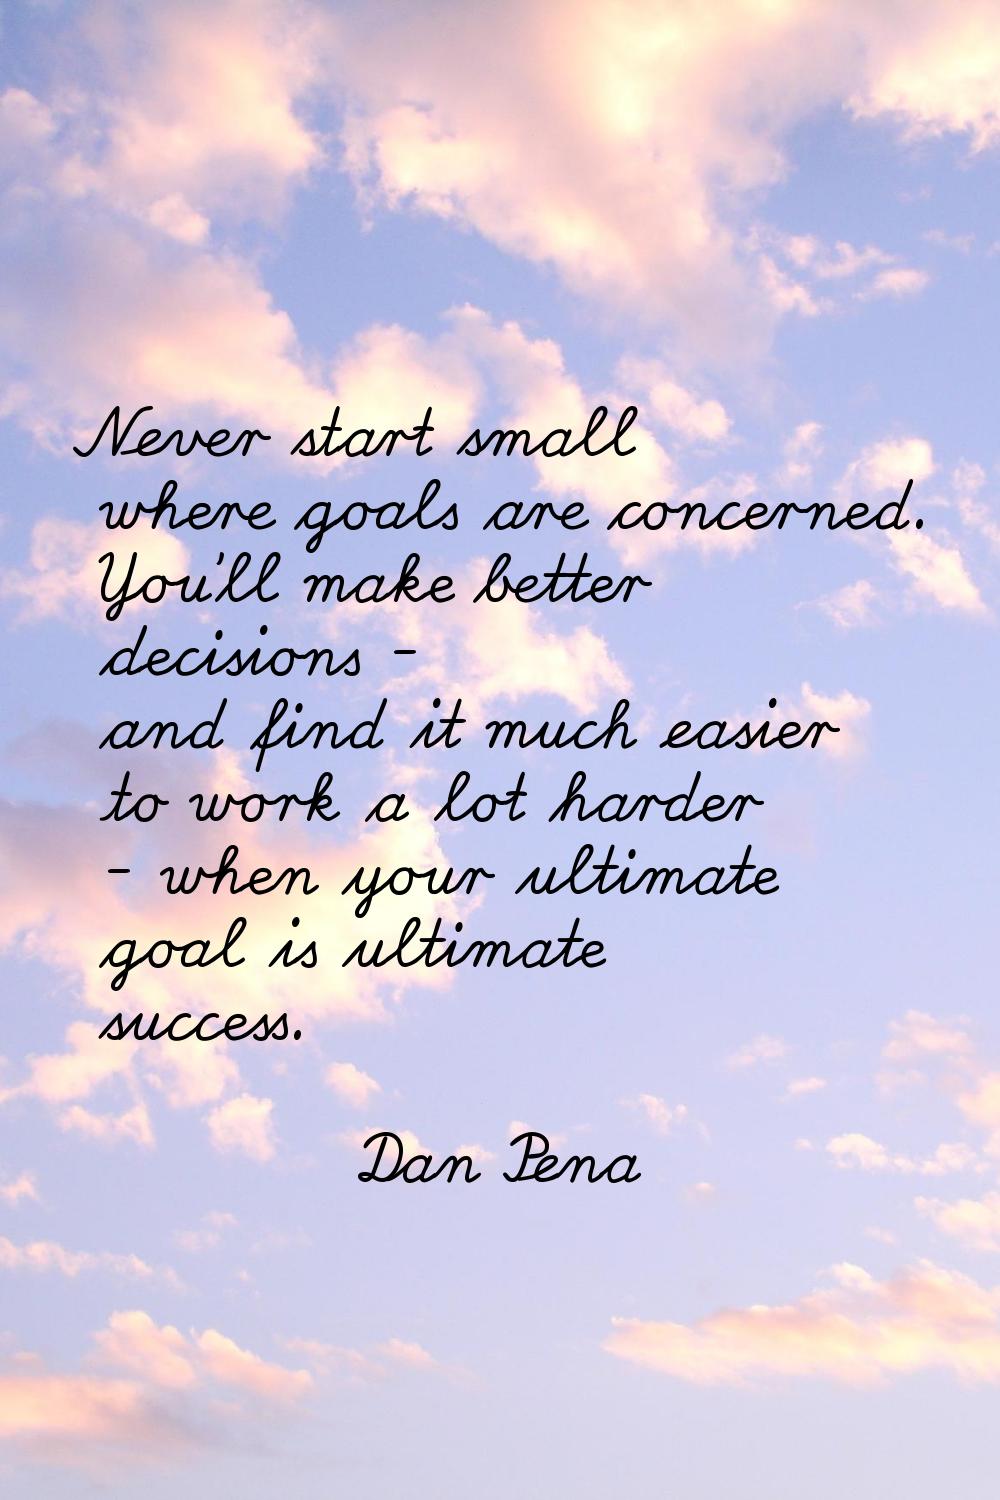 Never start small where goals are concerned. You'll make better decisions - and find it much easier